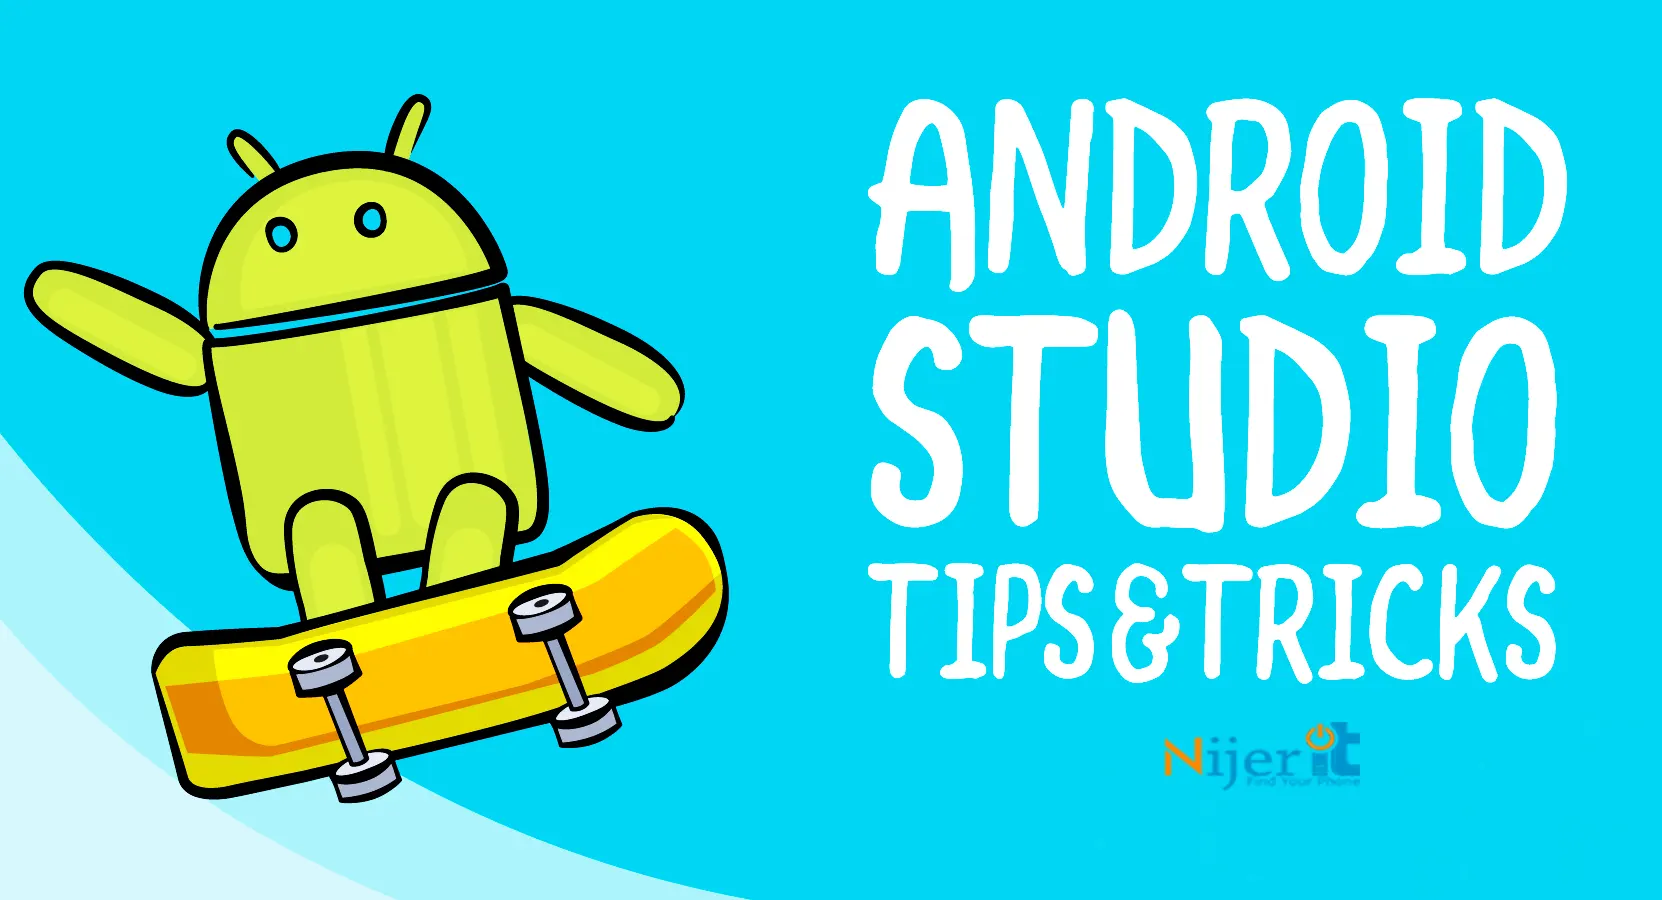 Android tips that everyone should use